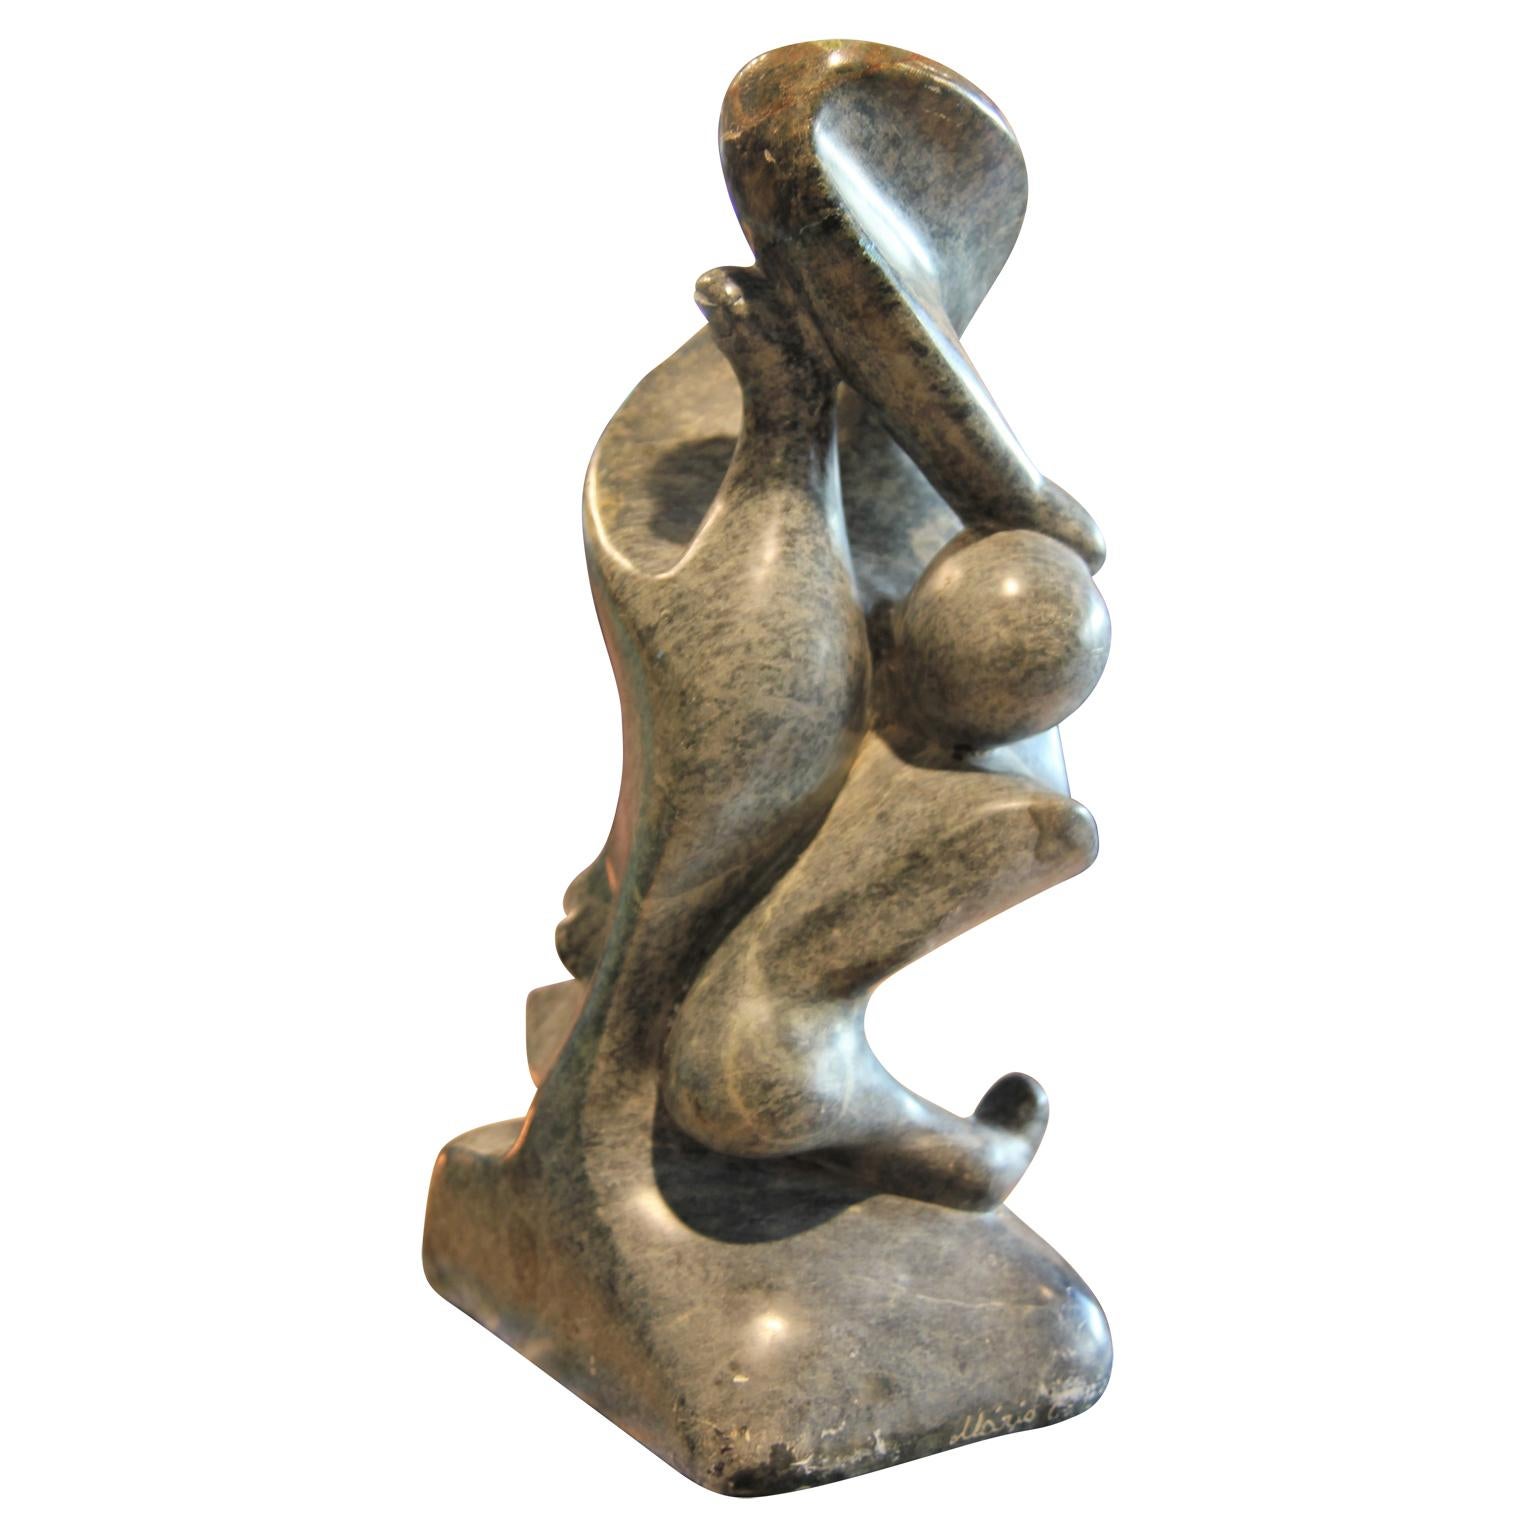 Abstract figurative grey marble sculpture that incorporates a variety of human appendages (nose, feet, and fingers). The base is signed 